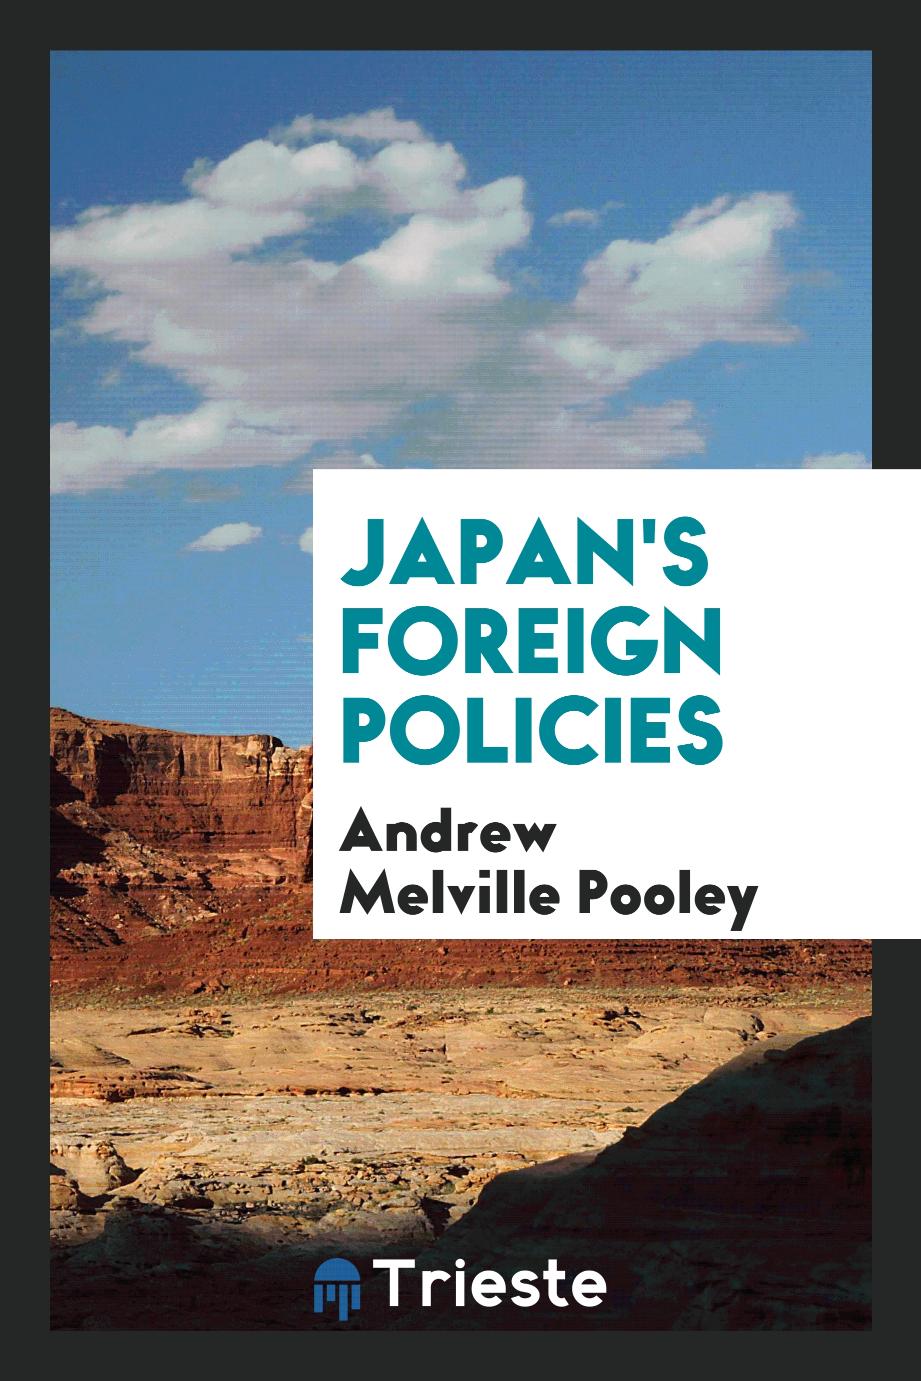 Japan's foreign policies